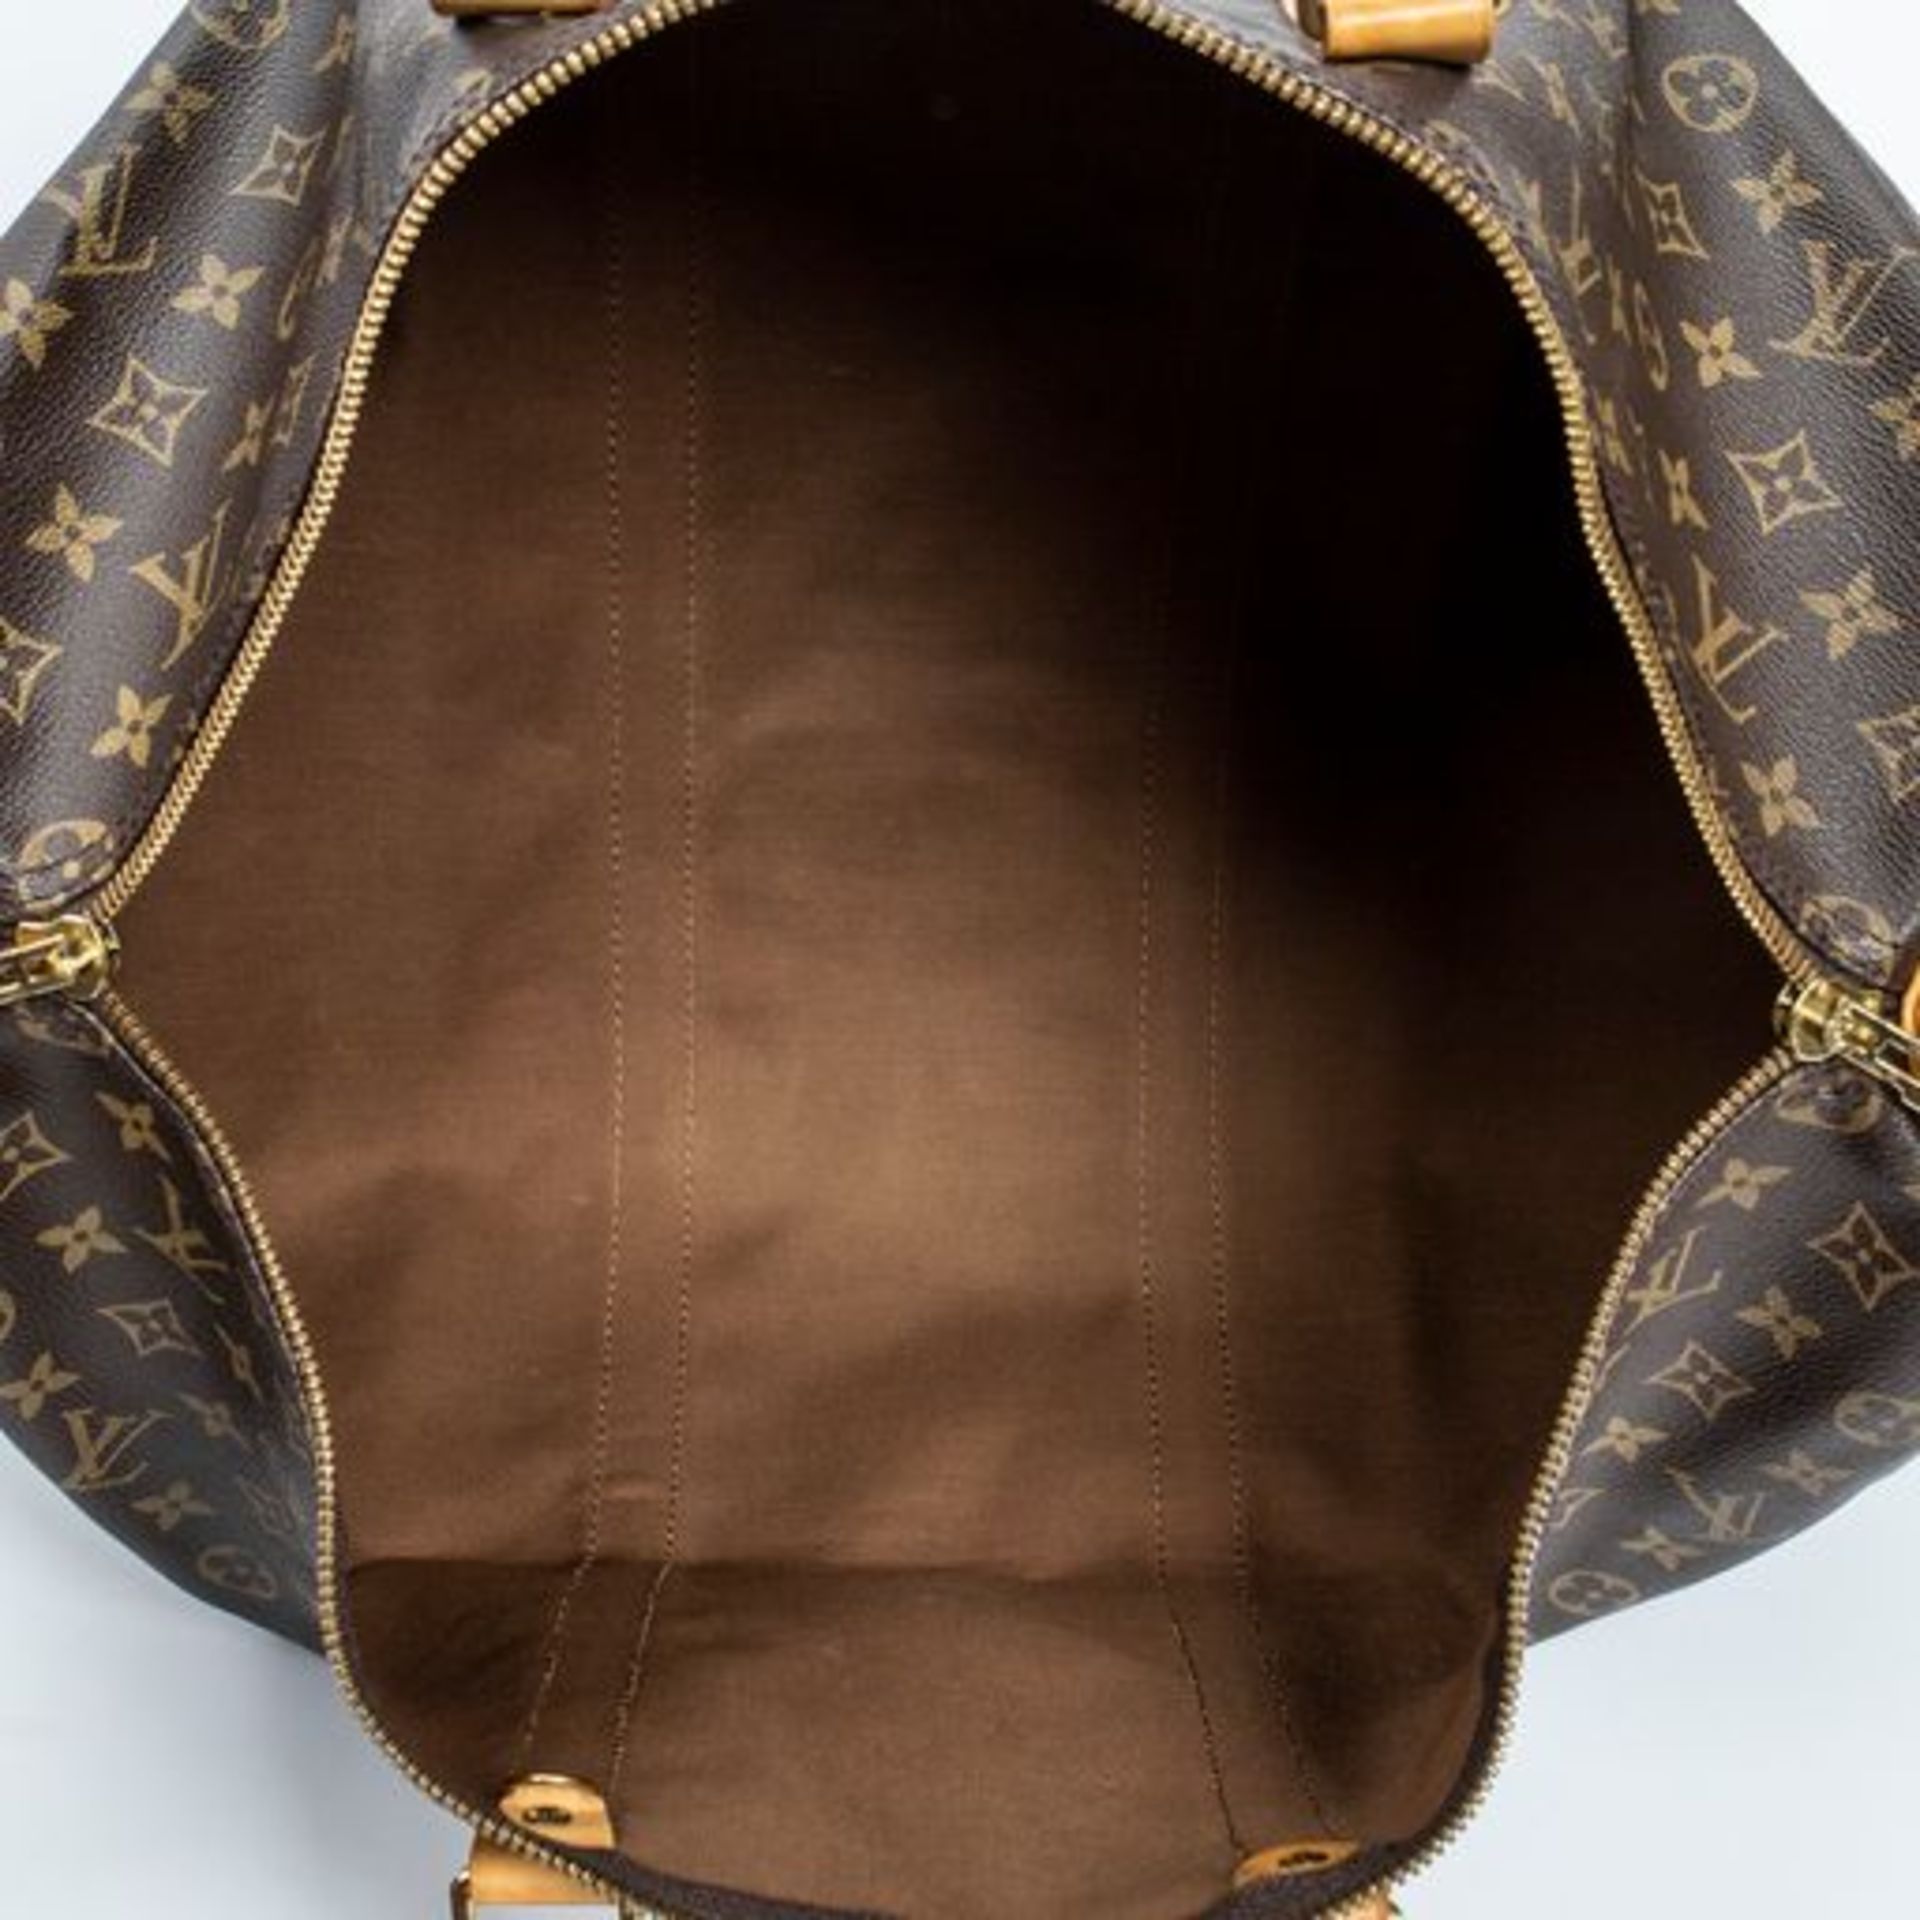 RRP £1340 Louis Vuitton Keepall Keepall Bandouliere Travel Bag Brown - AAS6233 - Grade AB - (Bags - Image 5 of 5